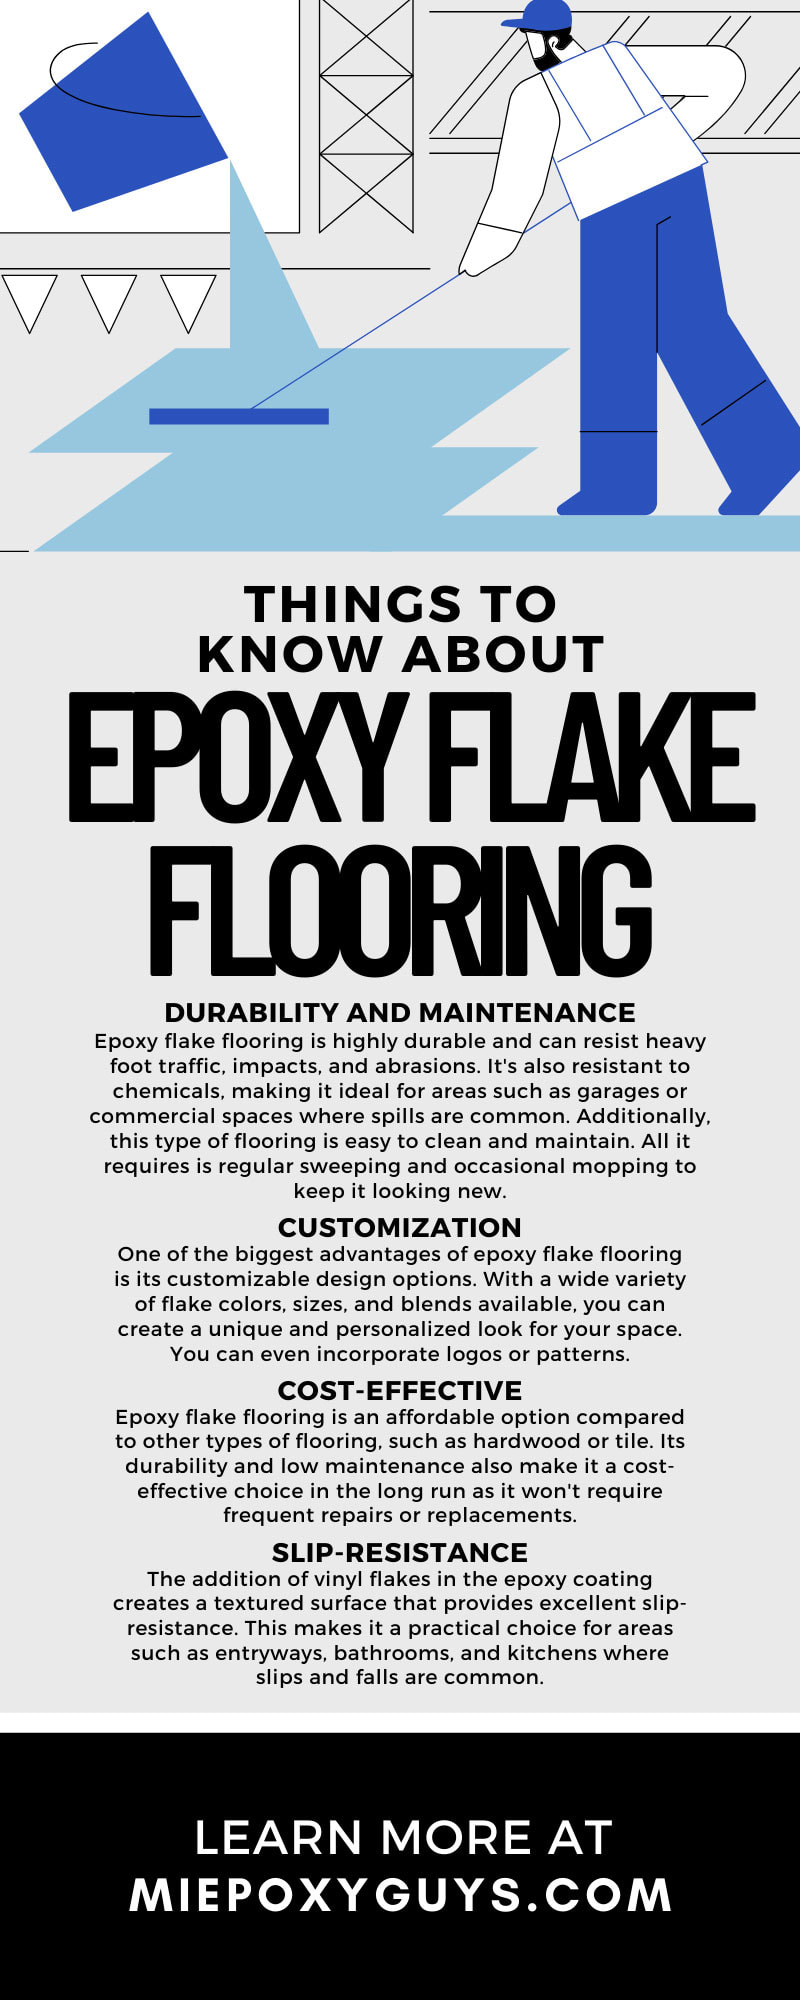 4 Things To Know About Epoxy Flake Flooring